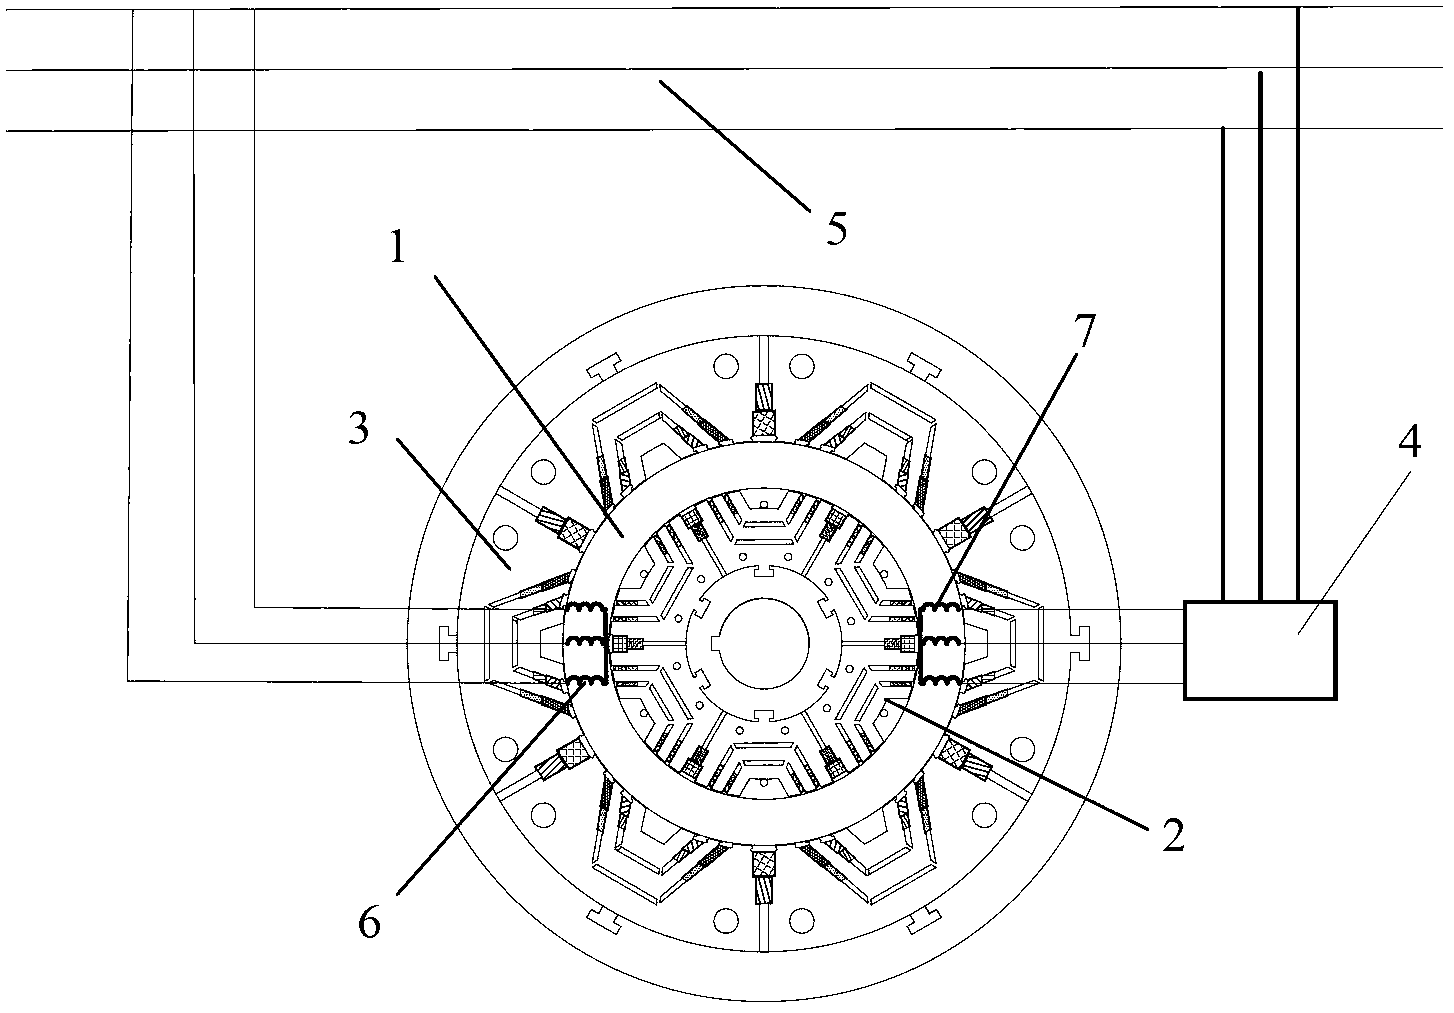 Stator double-winding alternating-current motor with double cage barrier rotors and control method thereof